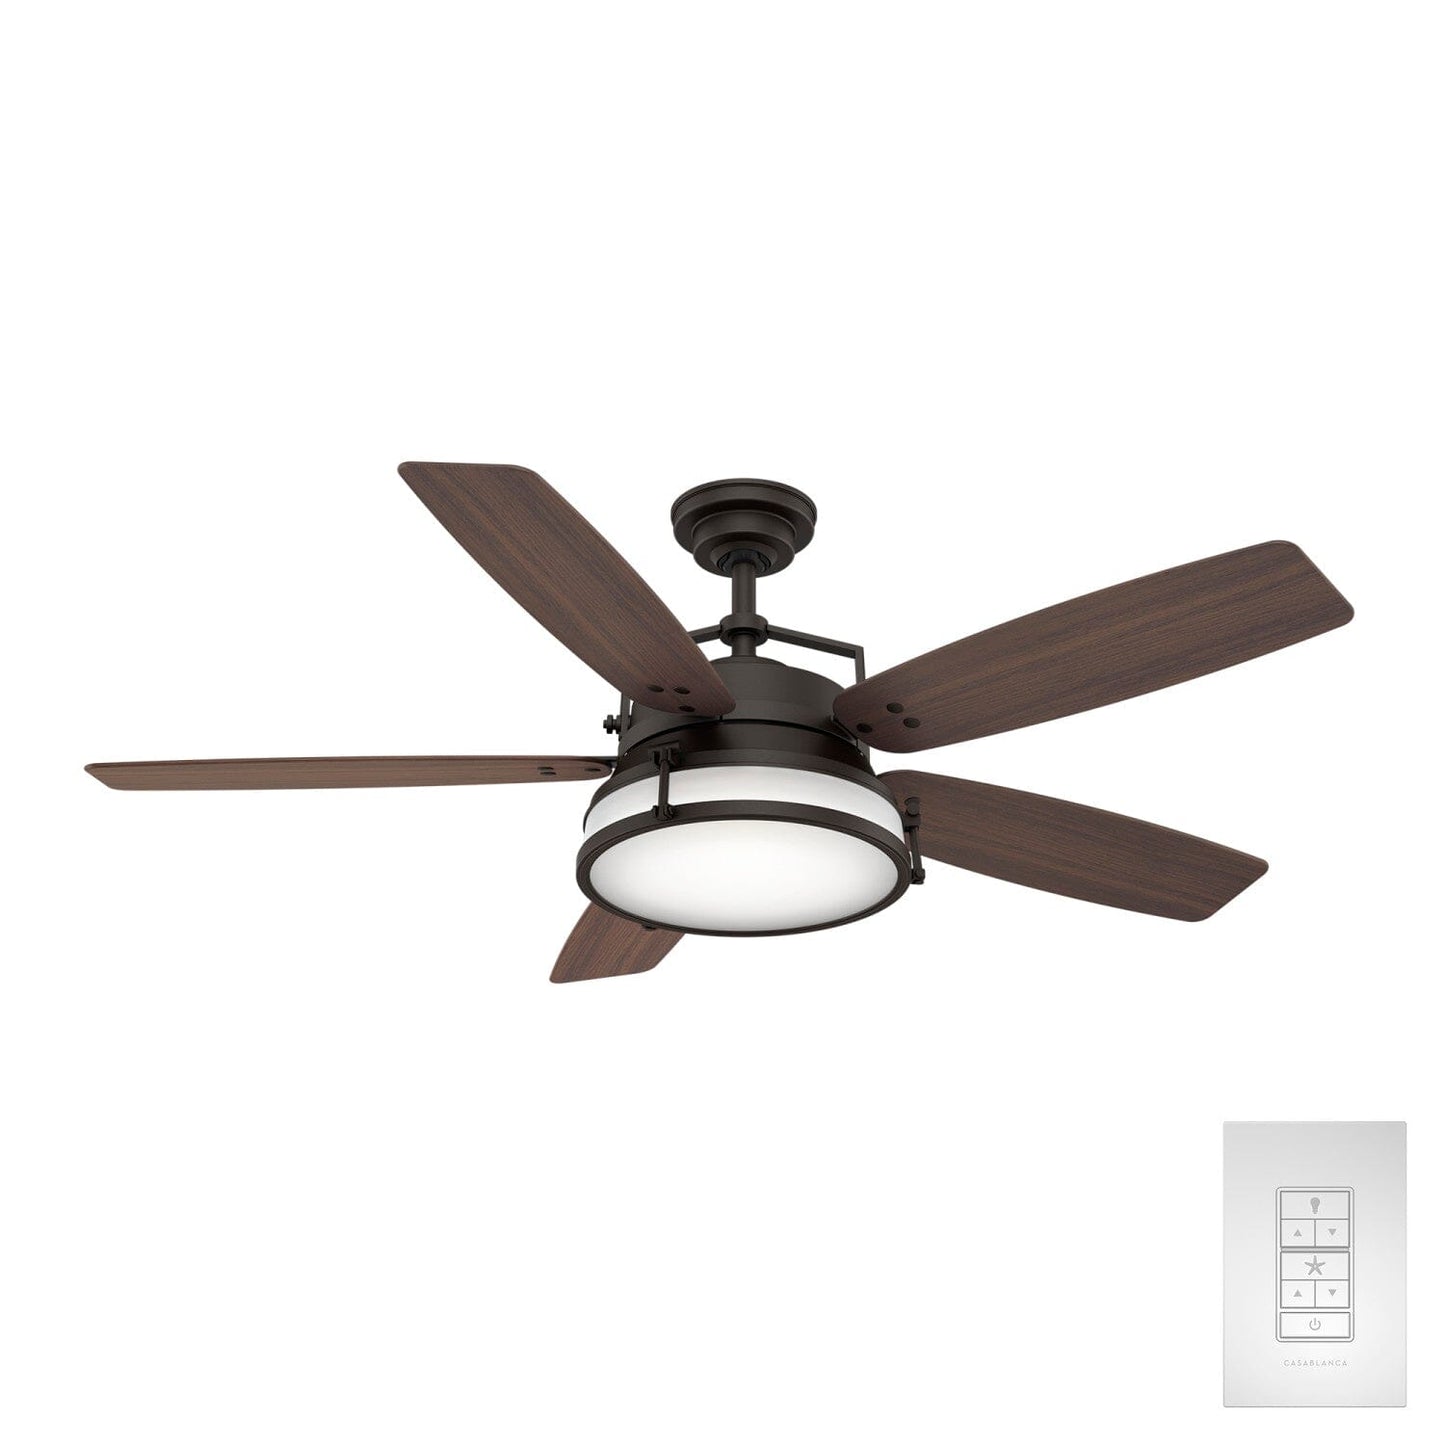 Caneel Bay Outdoor with LED Light 56 inch Ceiling Fans Casablanca Maiden Bronze - Smoked Walnut 